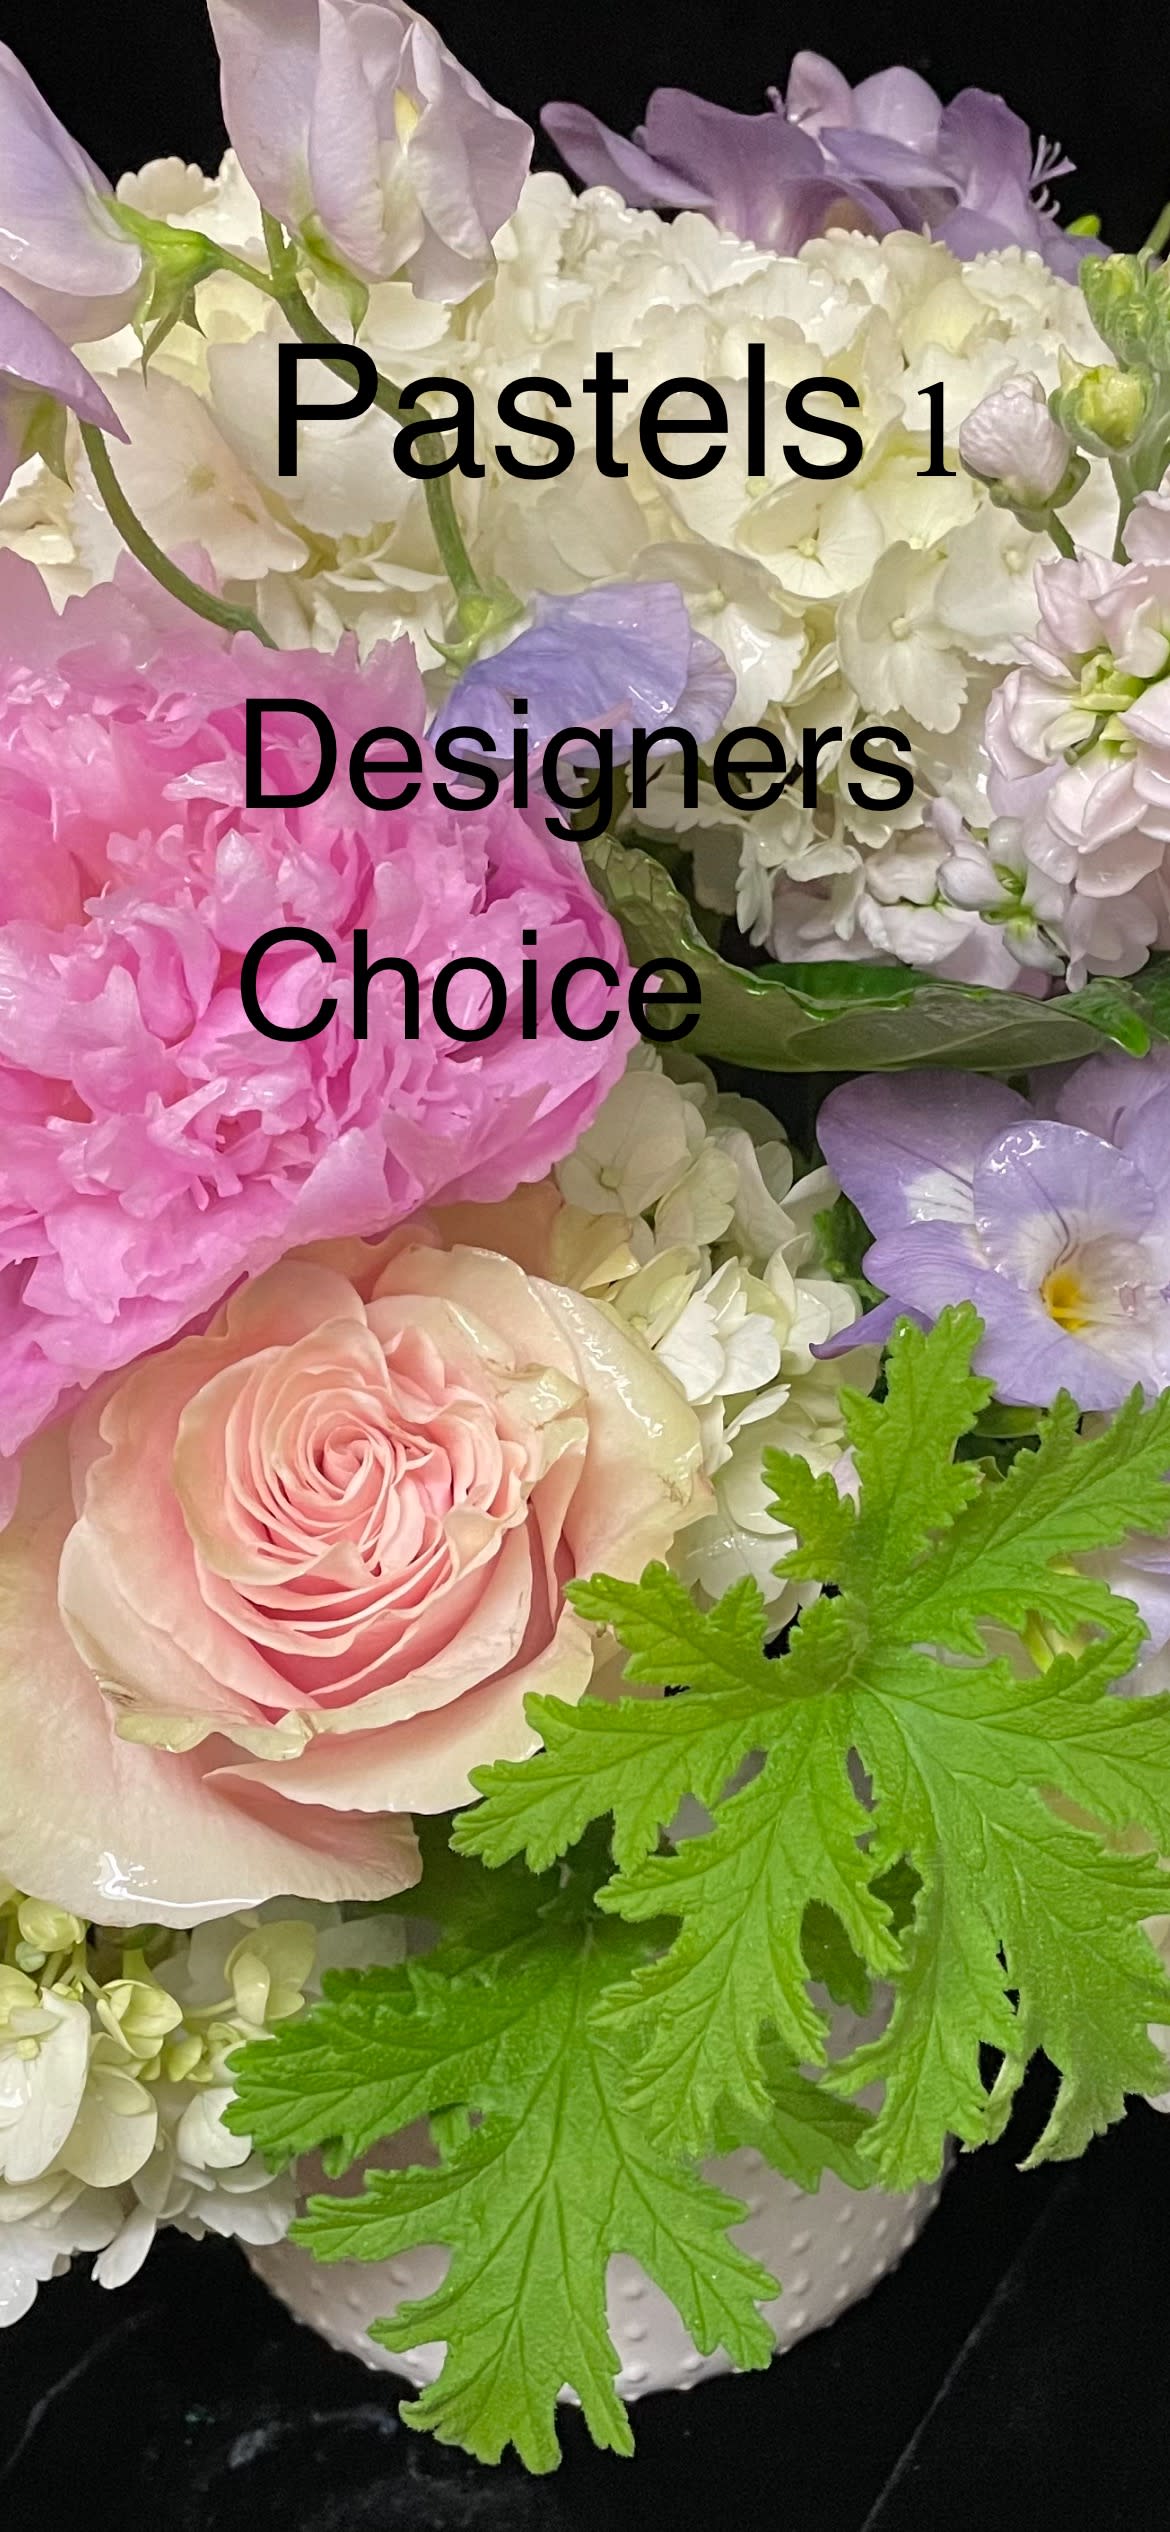 Pastels 1 - Let our designers do what they do best-craft a gorgeous assortment for you!